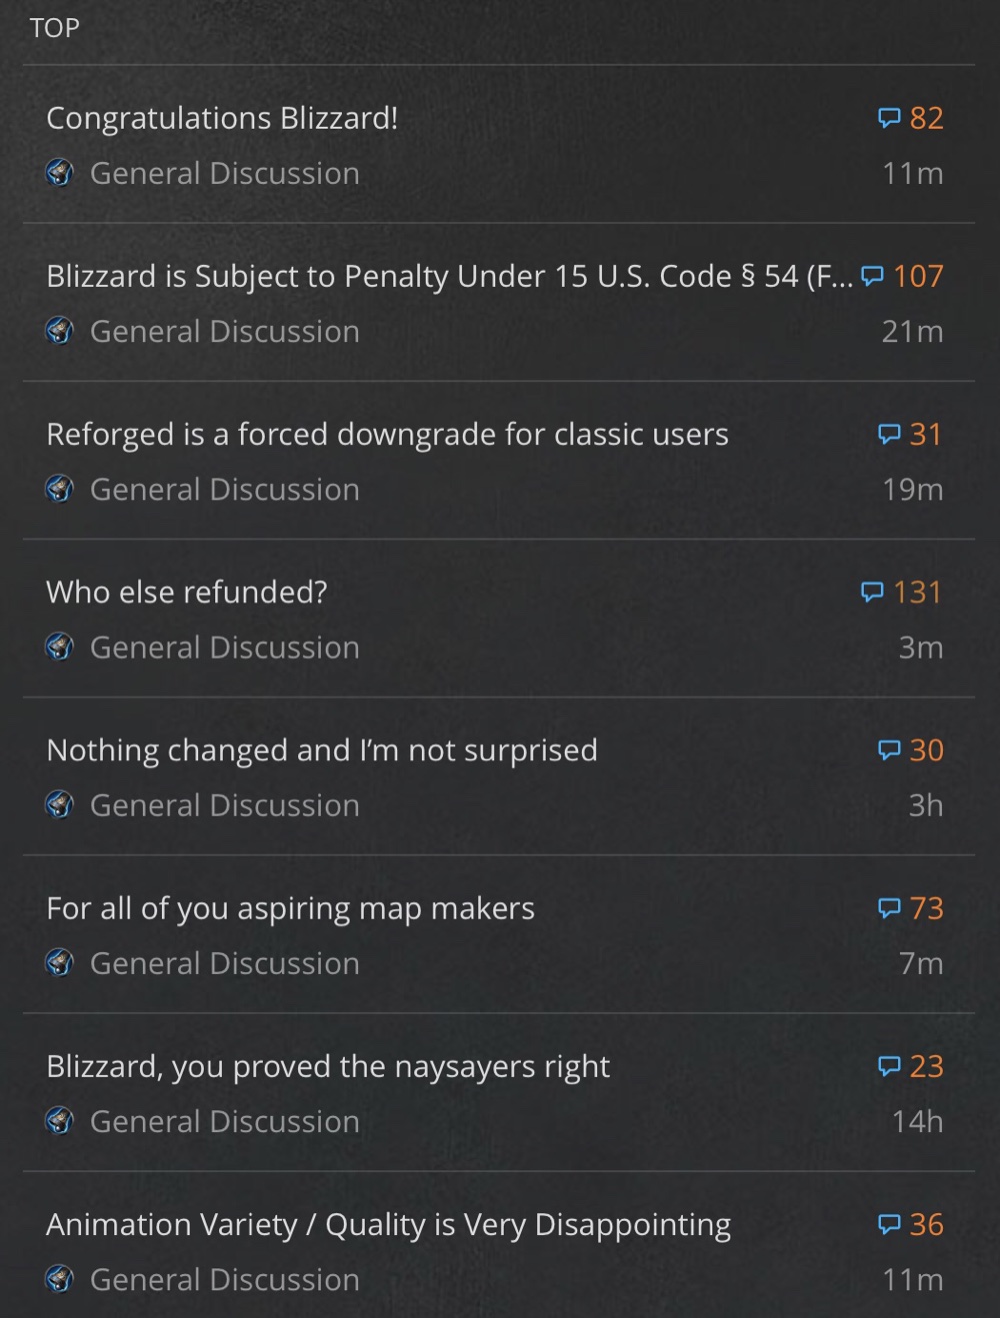 The official Warcraft 3 forum's top posts are filled with complaints about Warcraft 3: Reforged